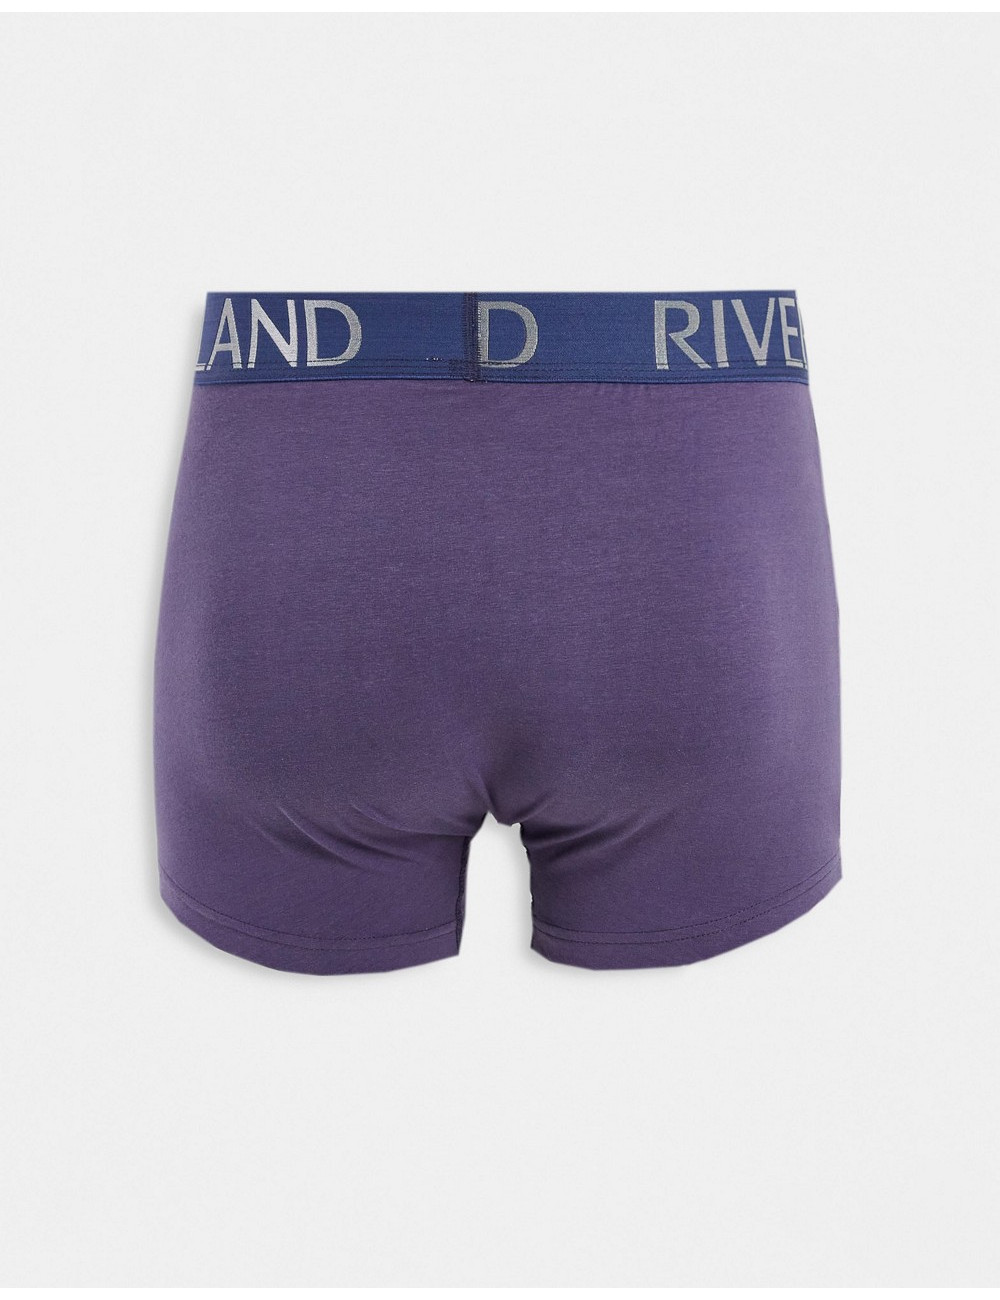 River Island 5 pack boxers...